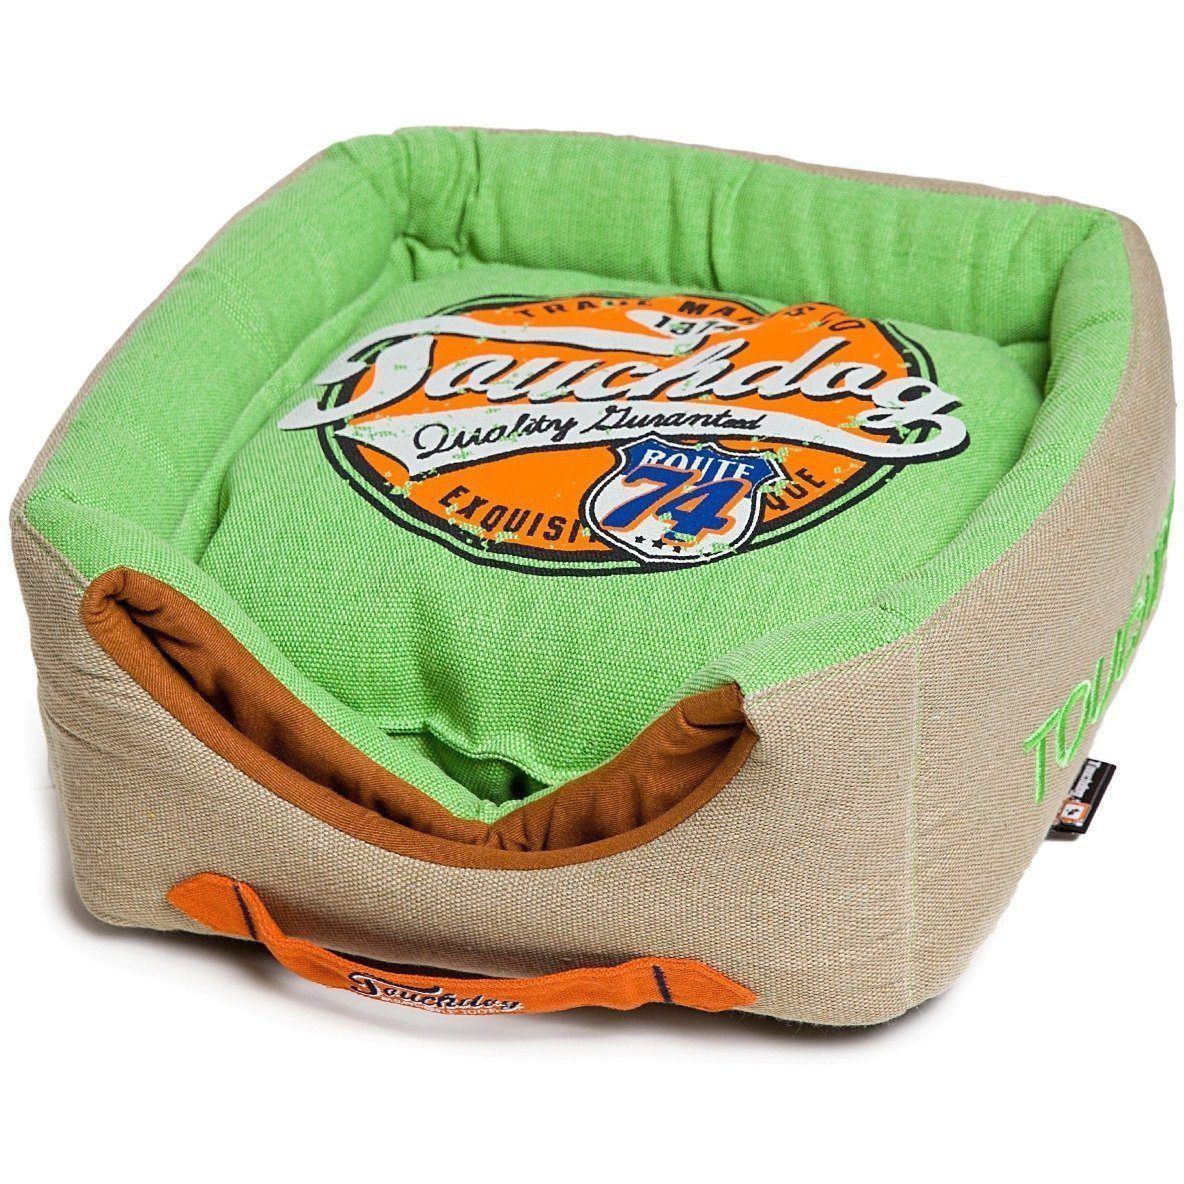 Touchdog ® 'Vintage Squared' 2-in-1 Convertible and Collapsible Dog and Cat Bed Mint Green, Khaki 